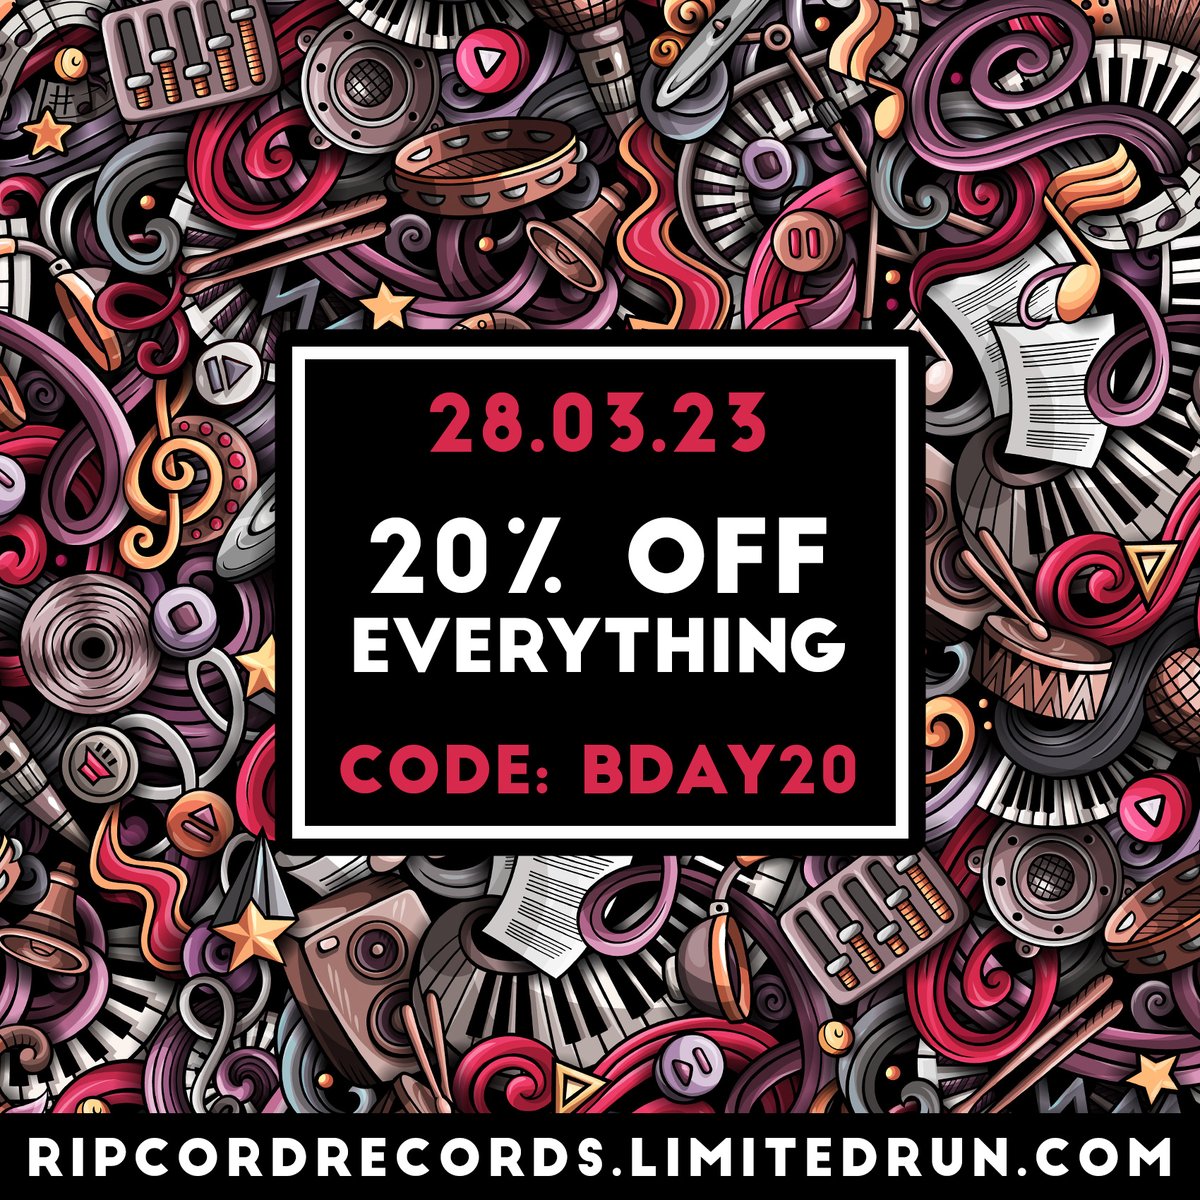 This is happening today til midnight. Valid on our distro and bandcamp. Distro: ripcordrecords.limitedrun.com Bandcamp: ripcordrecords.com